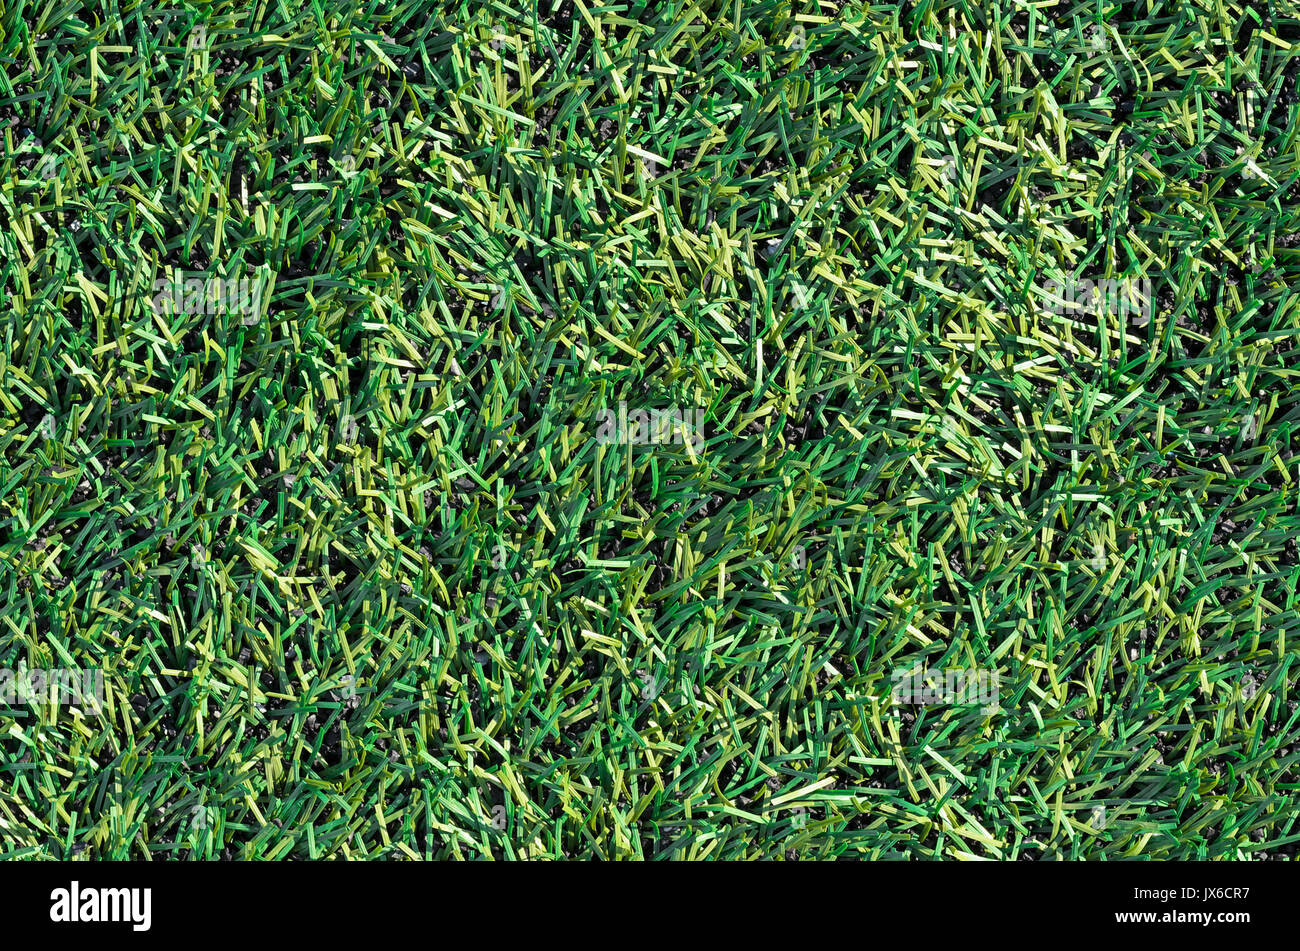 Fake Grass used on sports fields for soccer, baseball, golf and football. Closed-up of artificial green grass texture background. Green abstract lawn. Stock Photo